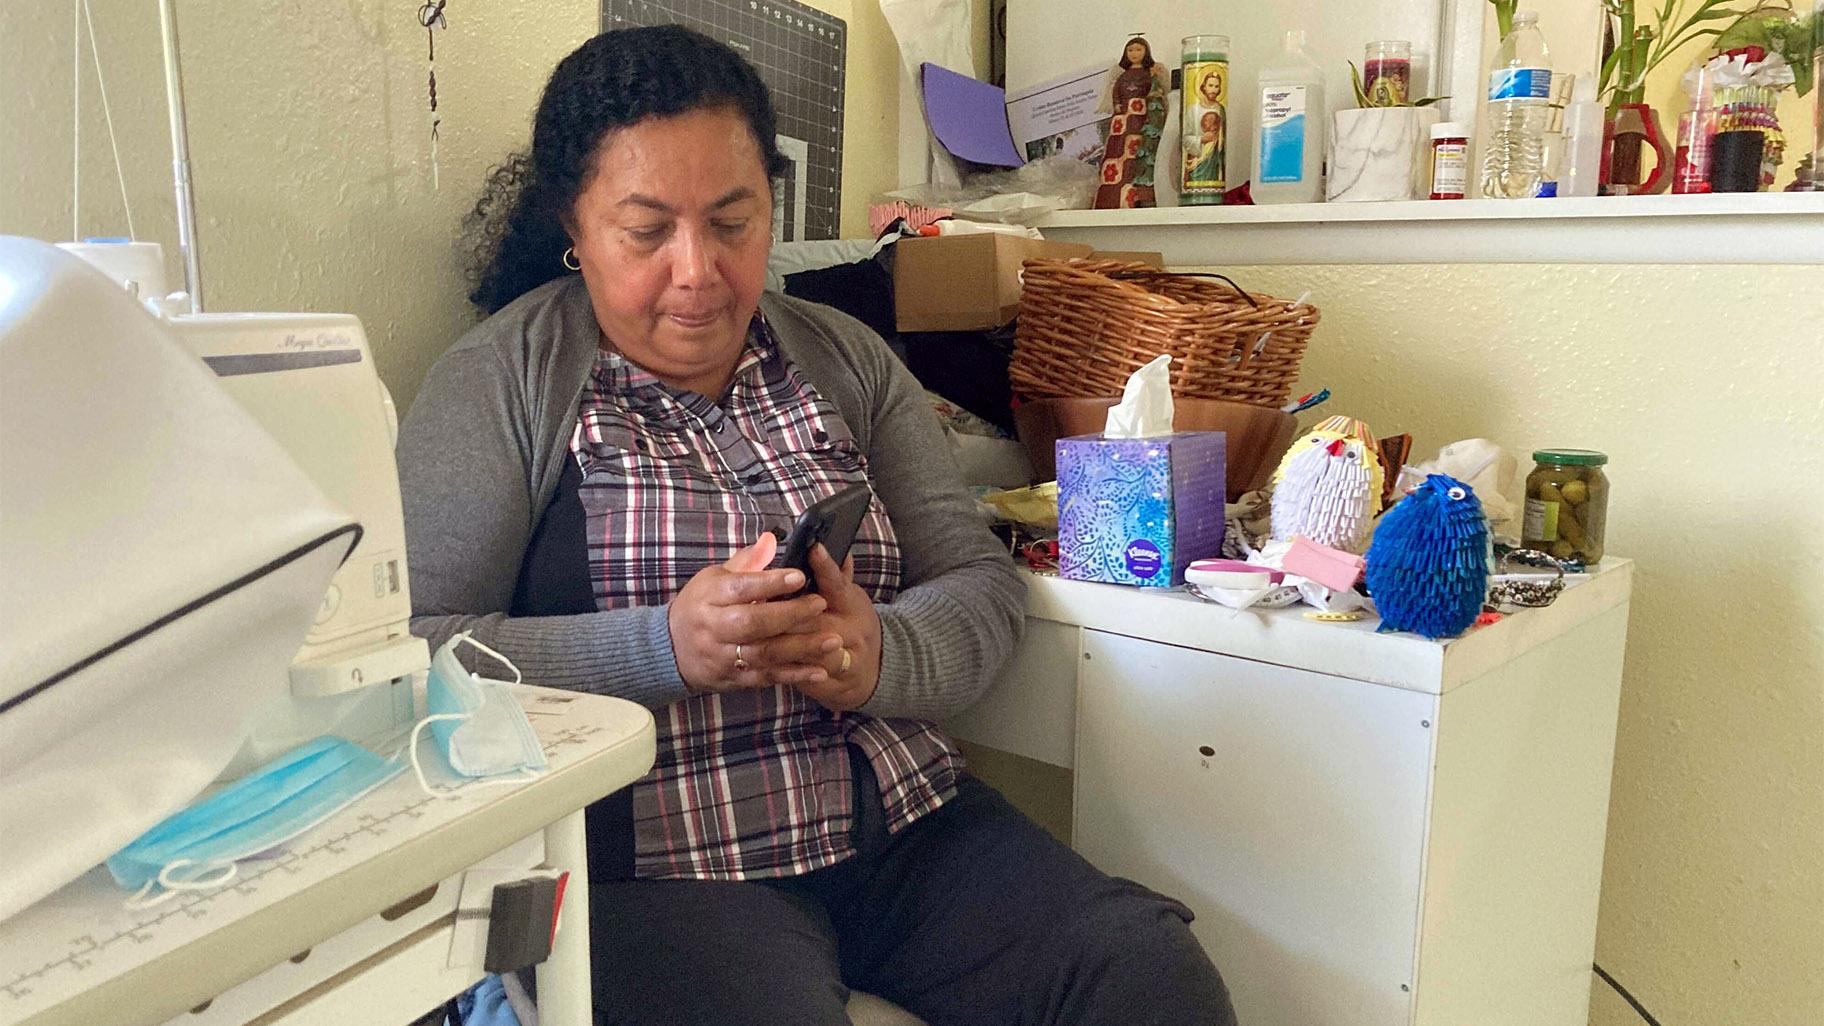 Rosalidia Dardon, 54, looks at a picture of her daughter in El Salvador as she sits in a refugee house in Texas, awaiting asylum or a protected immigration status on Nov. 4, 2021.  (Acacia Coronado / Report for America via AP)